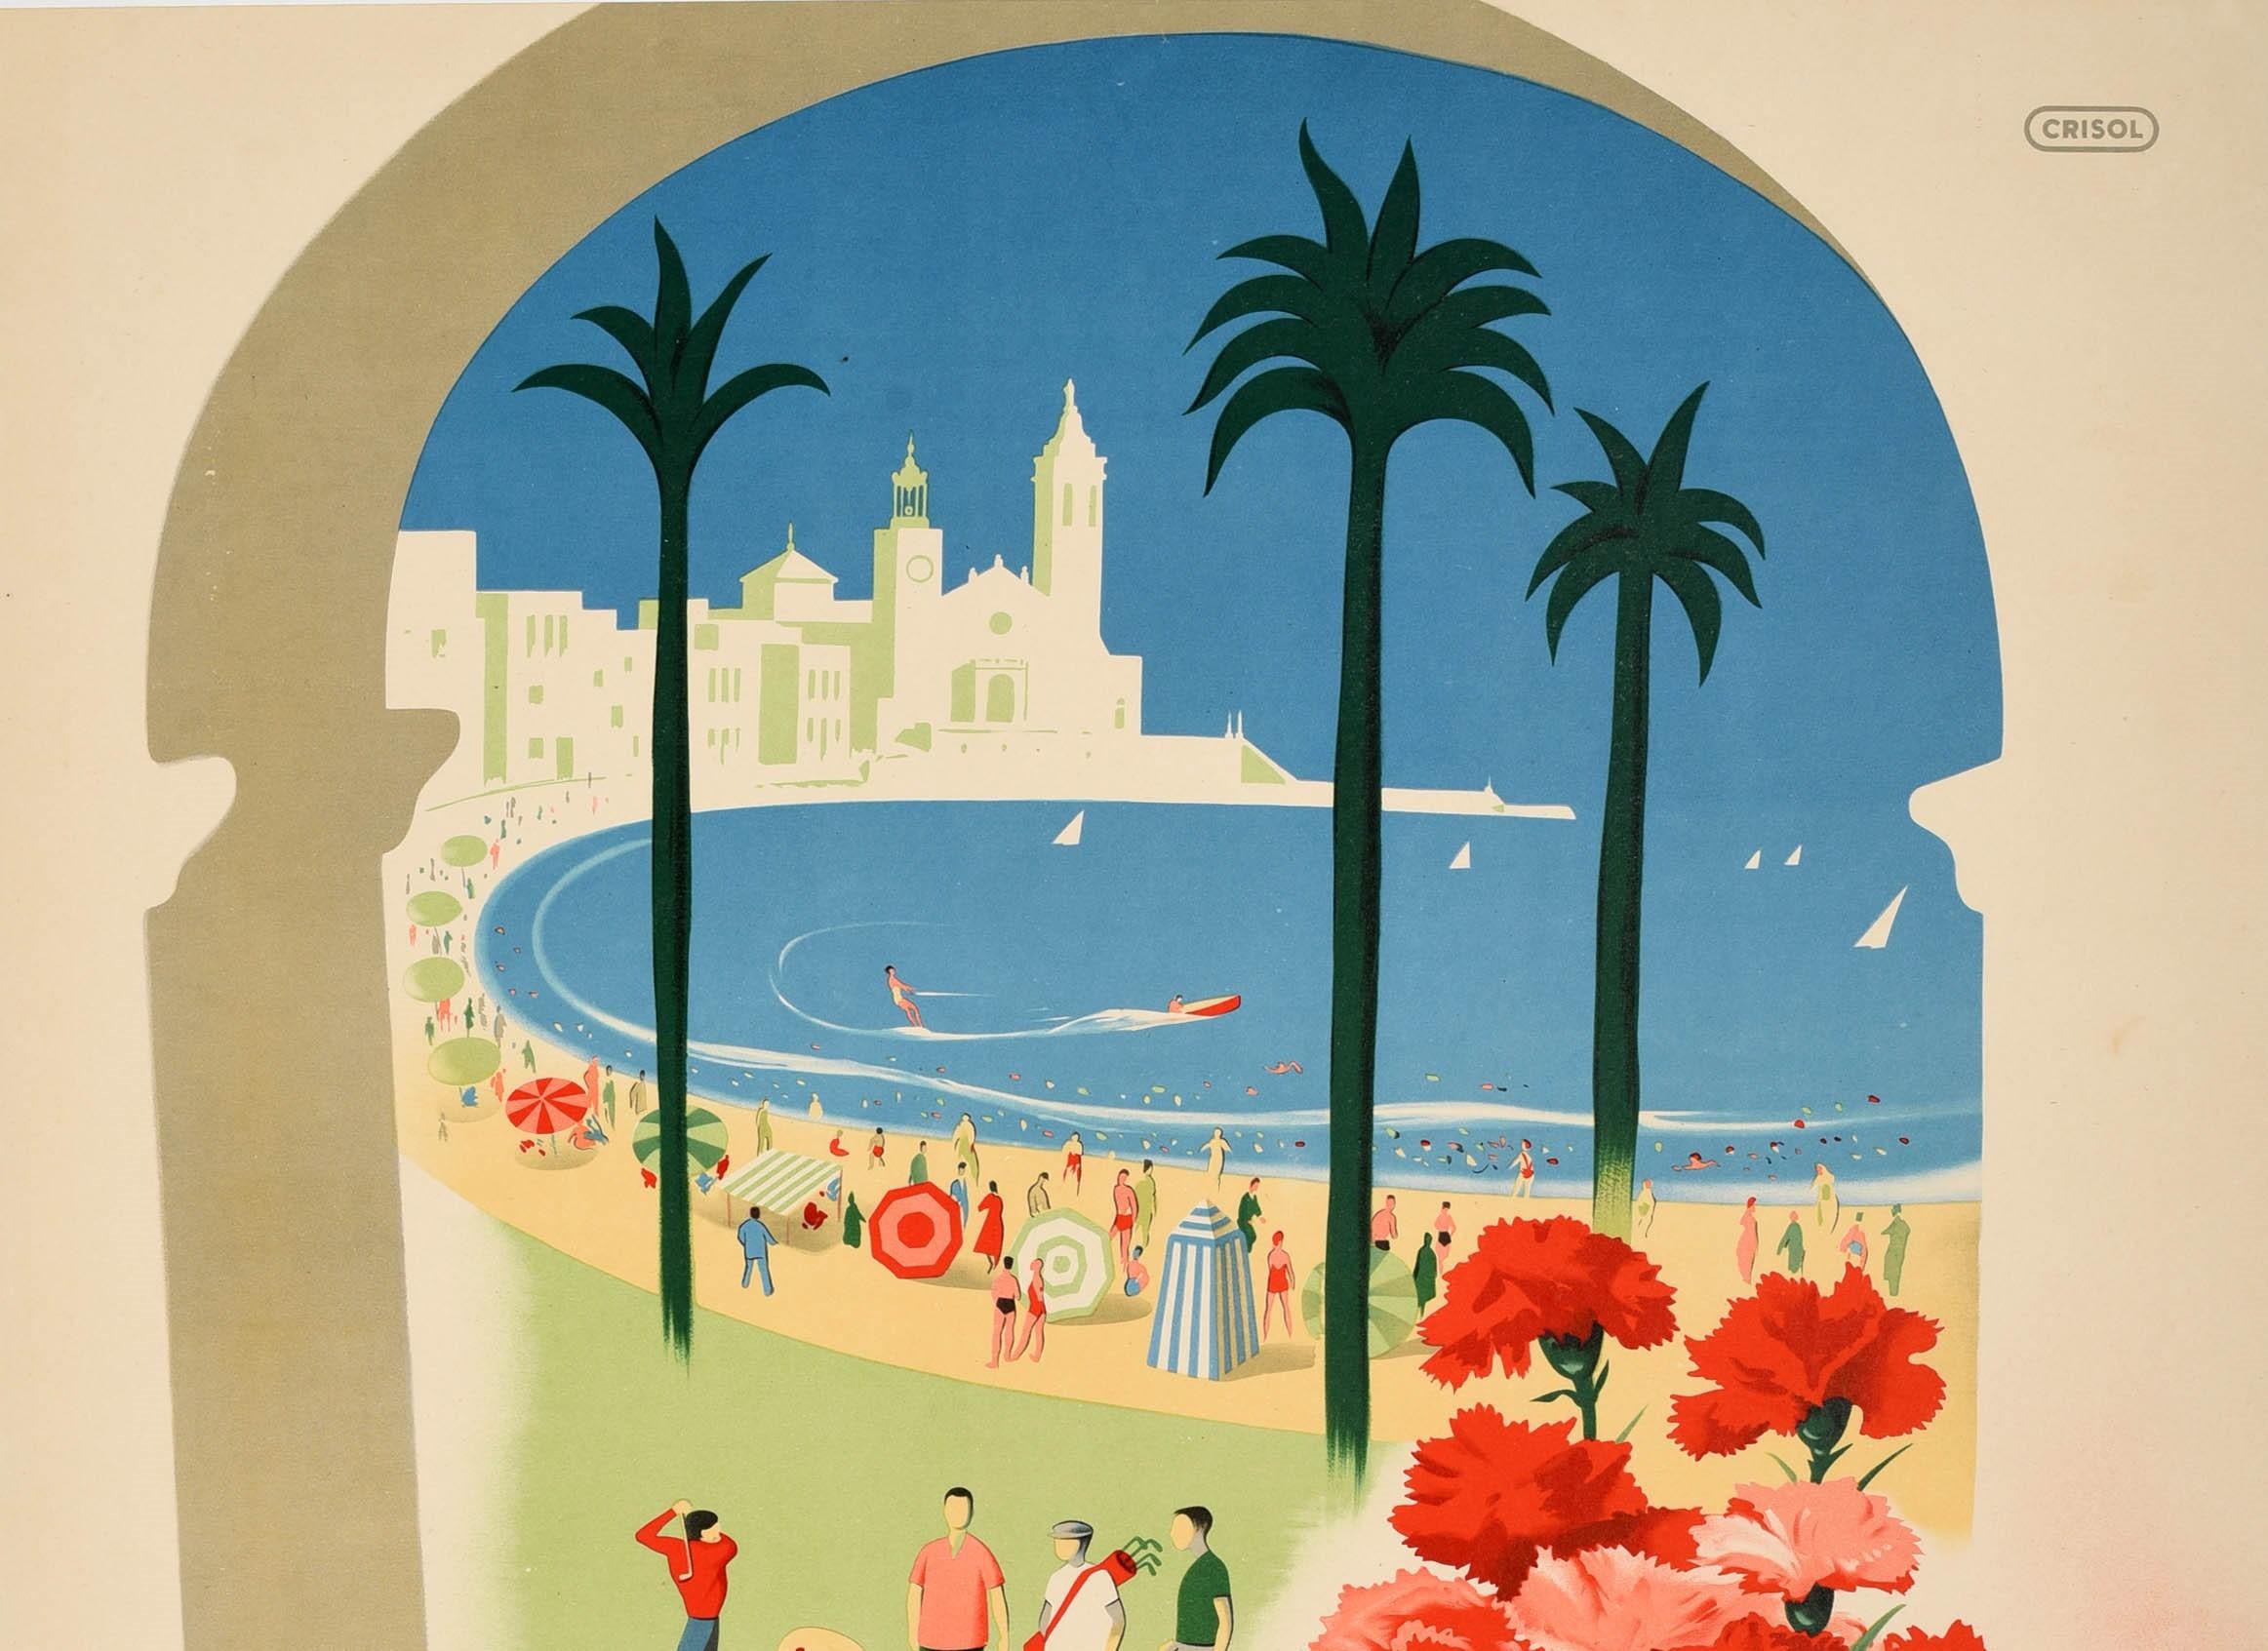 Original vintage travel advertising poster promoting the XIX Esposicion Nacional de Claveles de interes artistico nacional / National Exhibition of Carnations from 25 May to 8 June at the seaside town of Sitges on the Mediterranean Sea in Catalonia